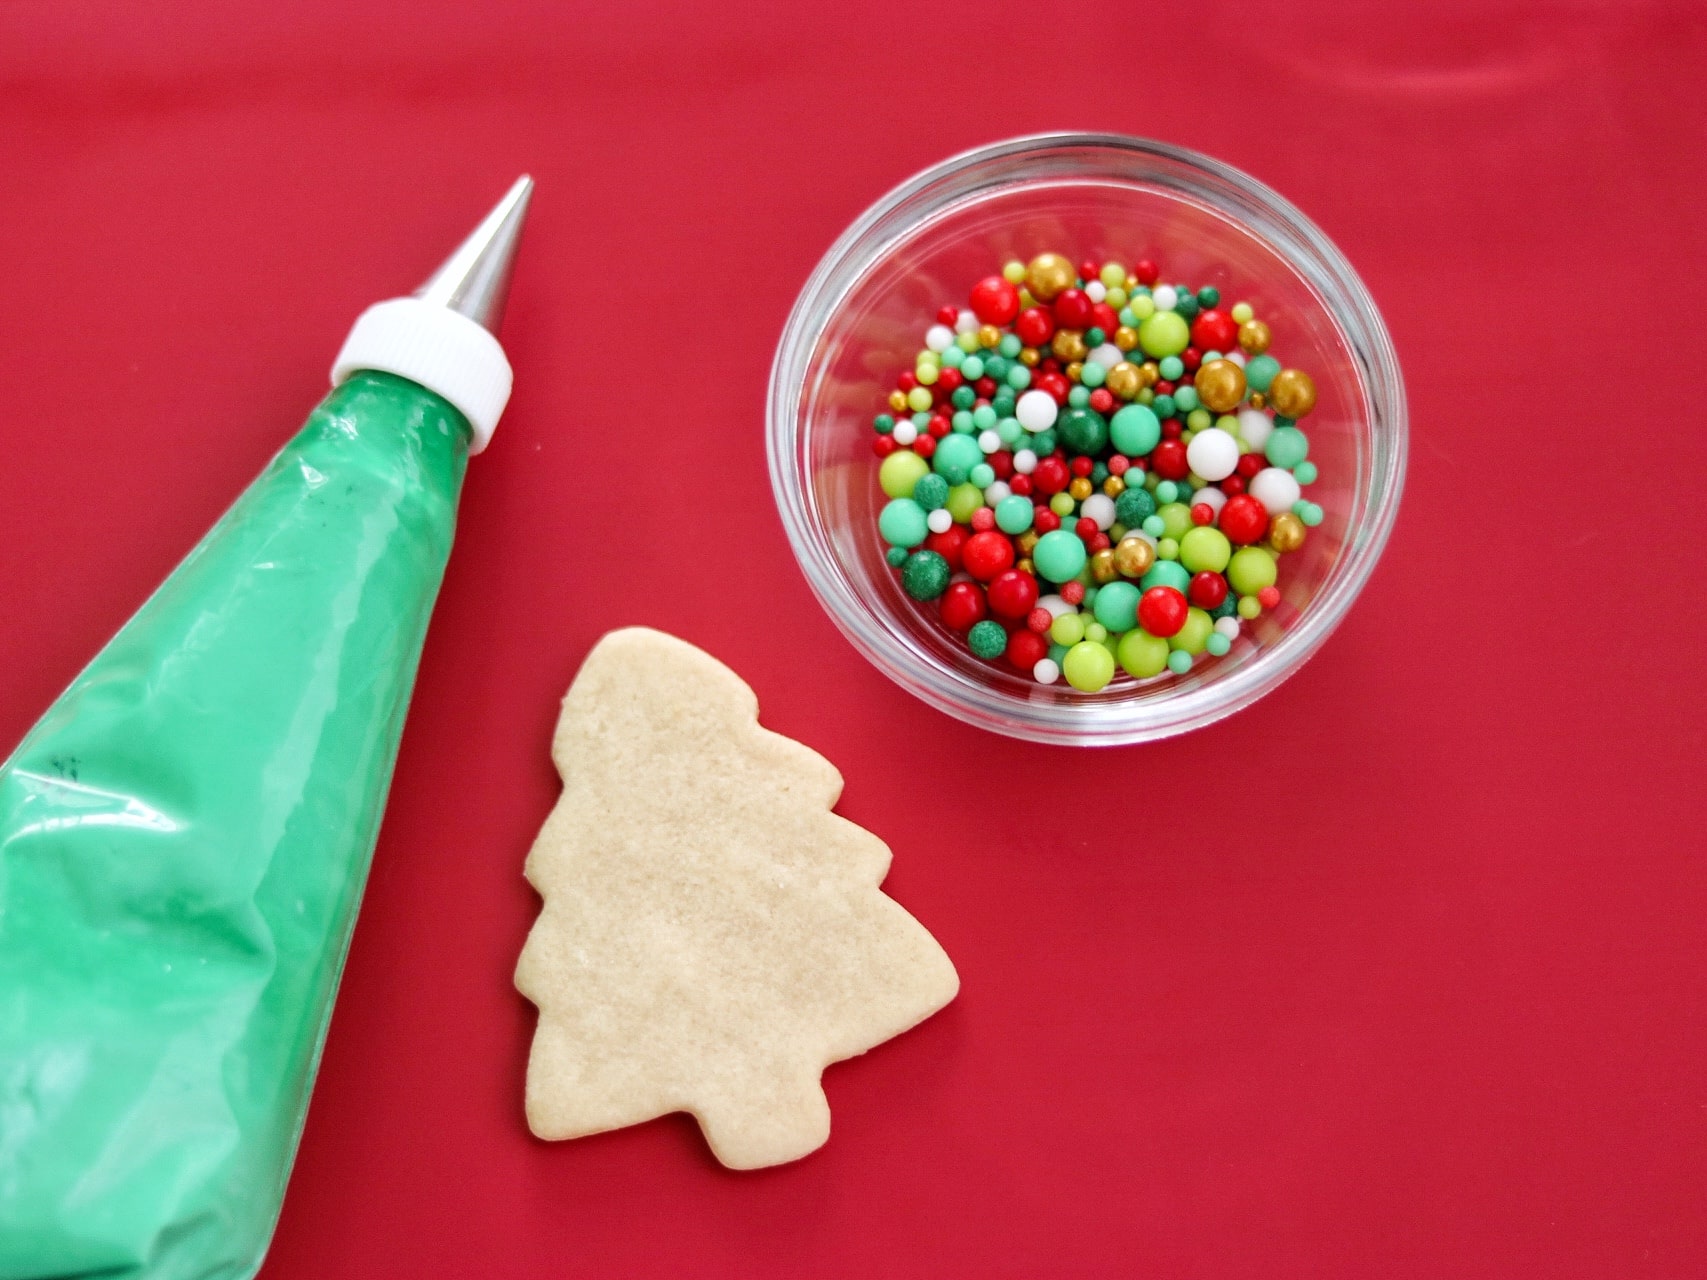 hosting a Christmas cookie decorating party for a Christmas movie themed party